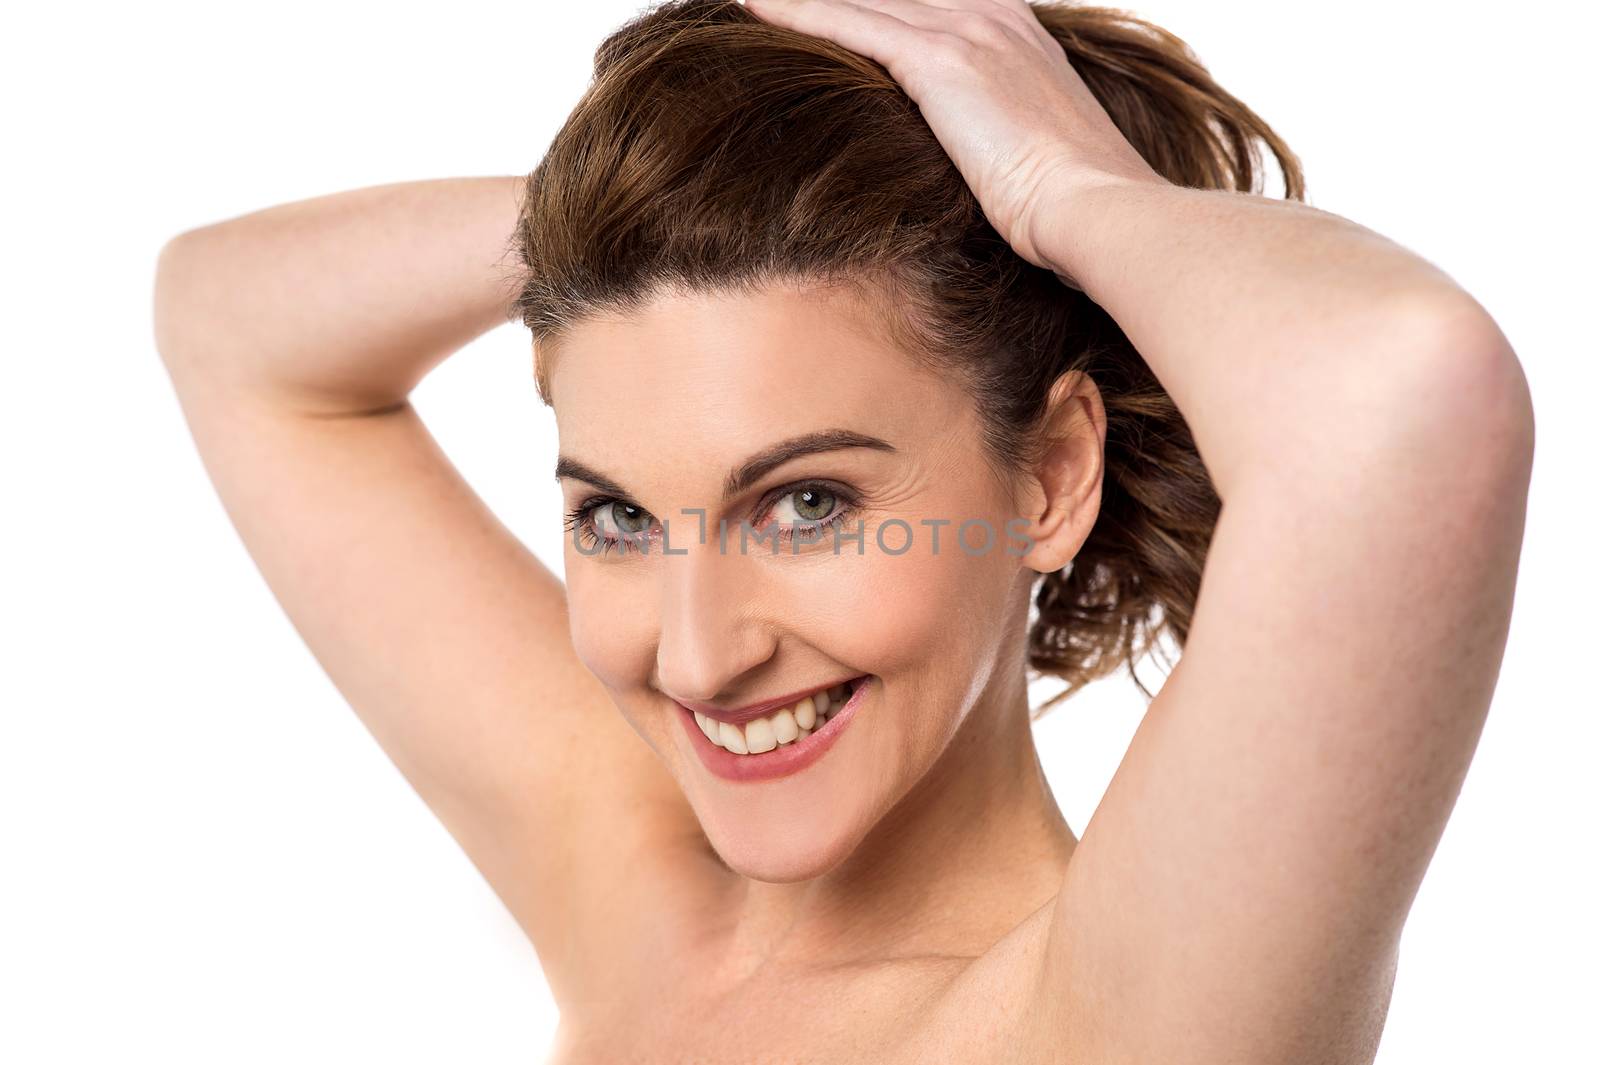 Smiling topless woman tying her hair